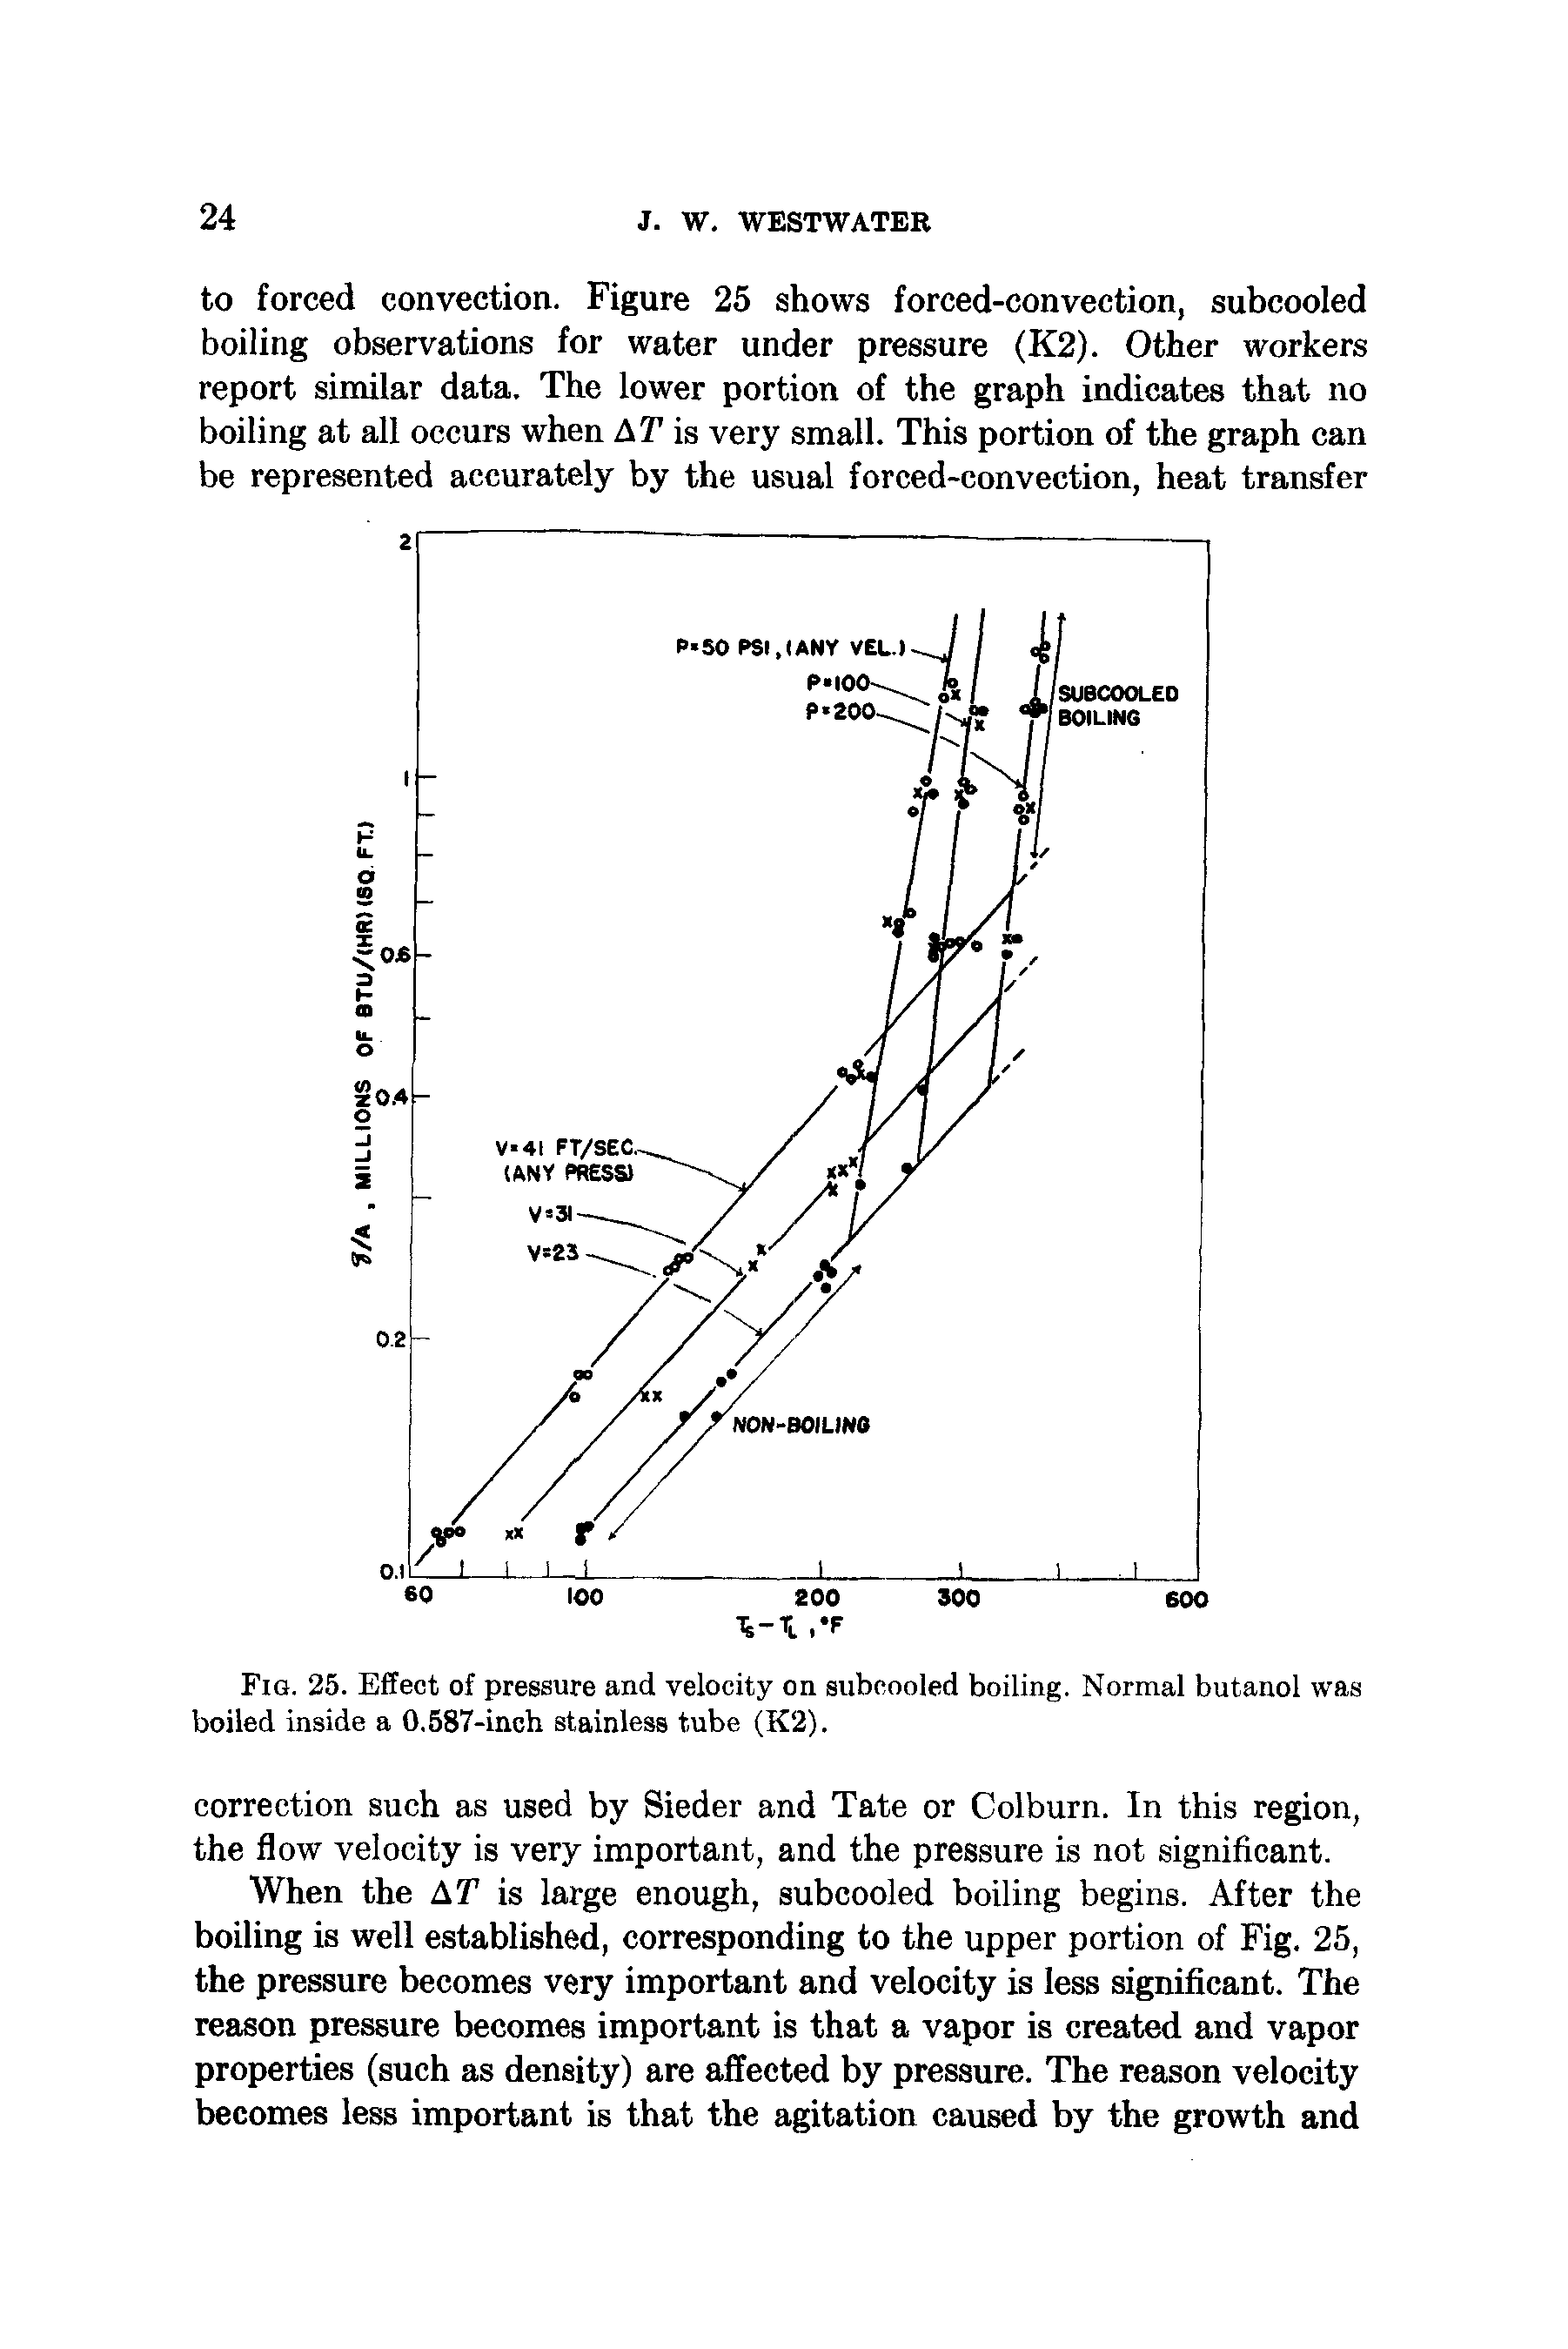 Fig. 25. Effect of pressure and velocity on subcooled boiling. Normal butanol was boiled inside a 0.587-inch stainless tube (K2).